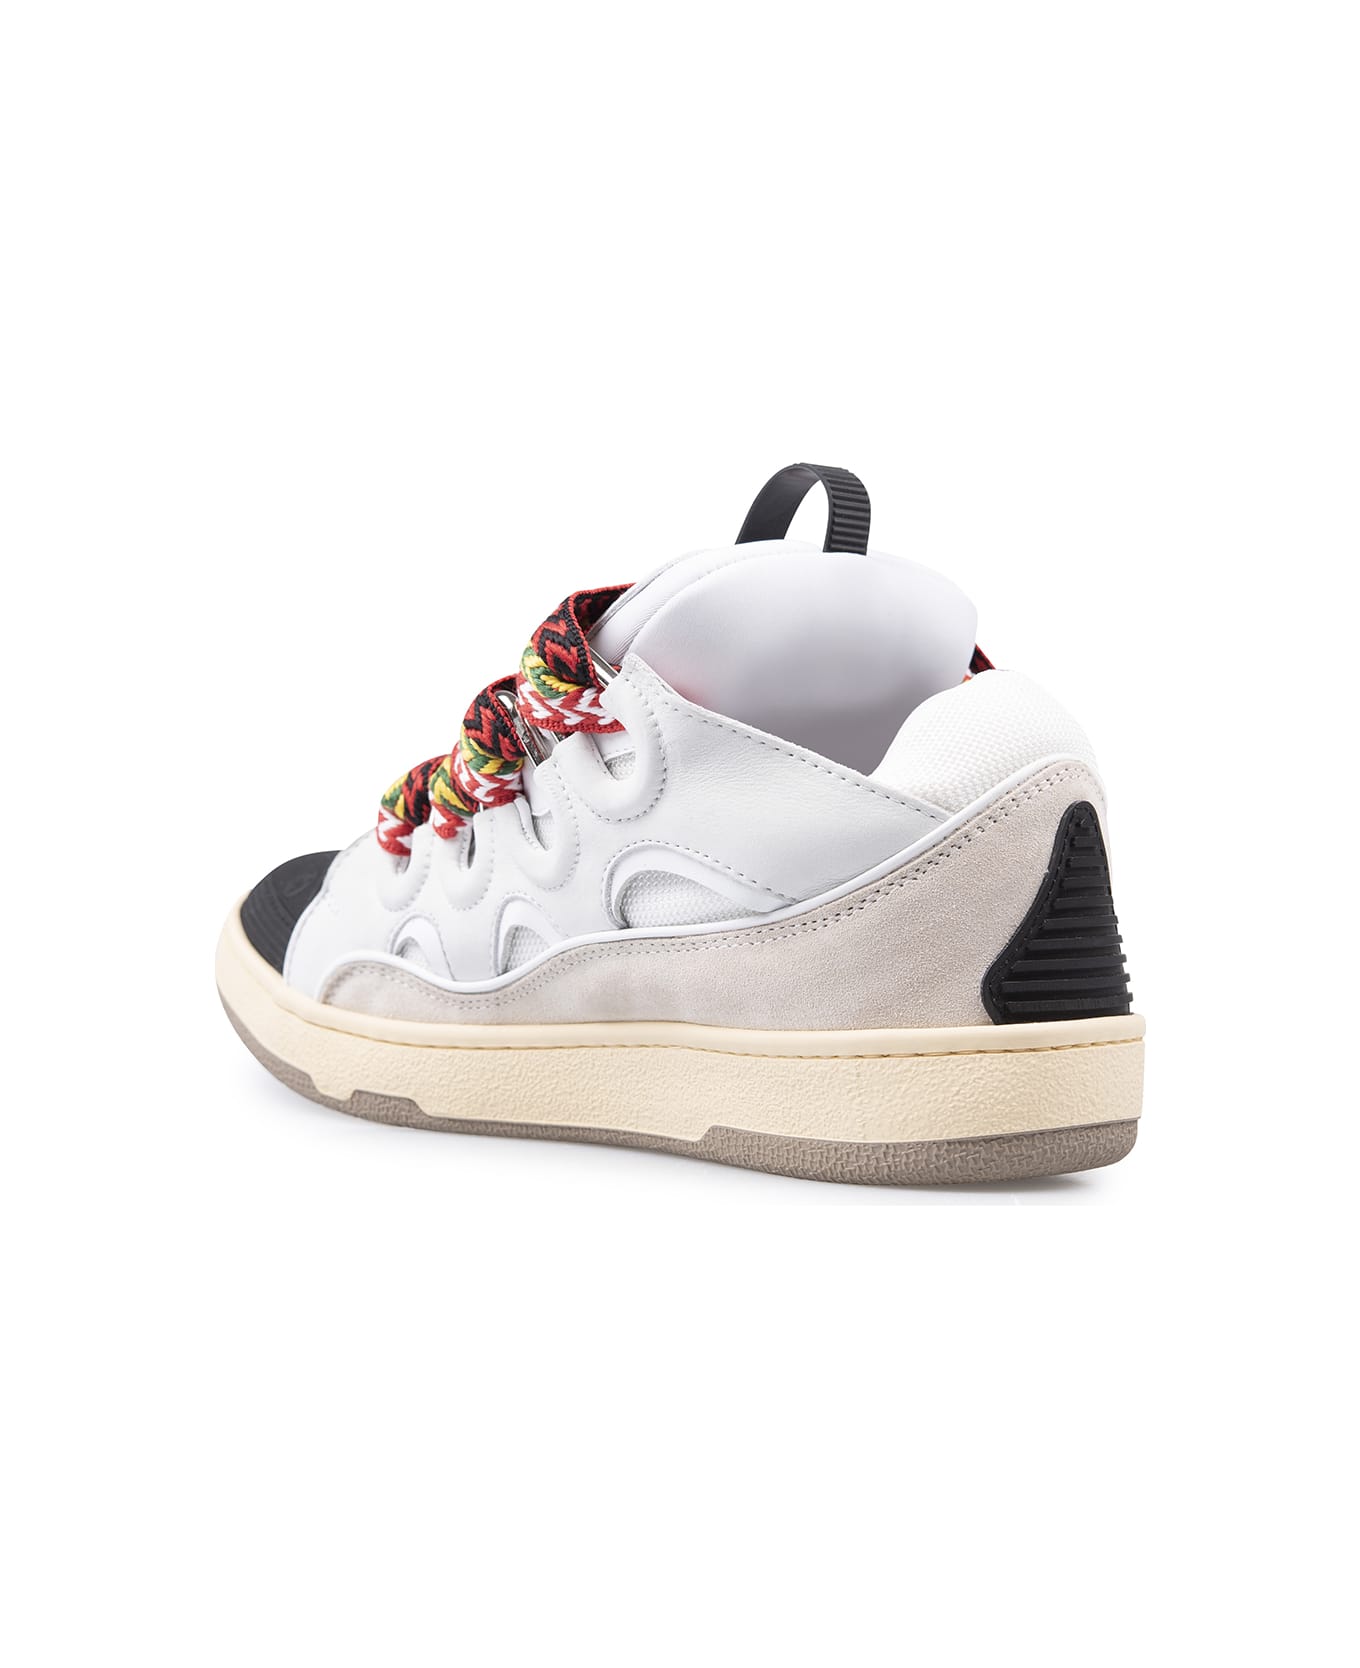 Lanvin "curb" Sneakers In White Leather - White スニーカー